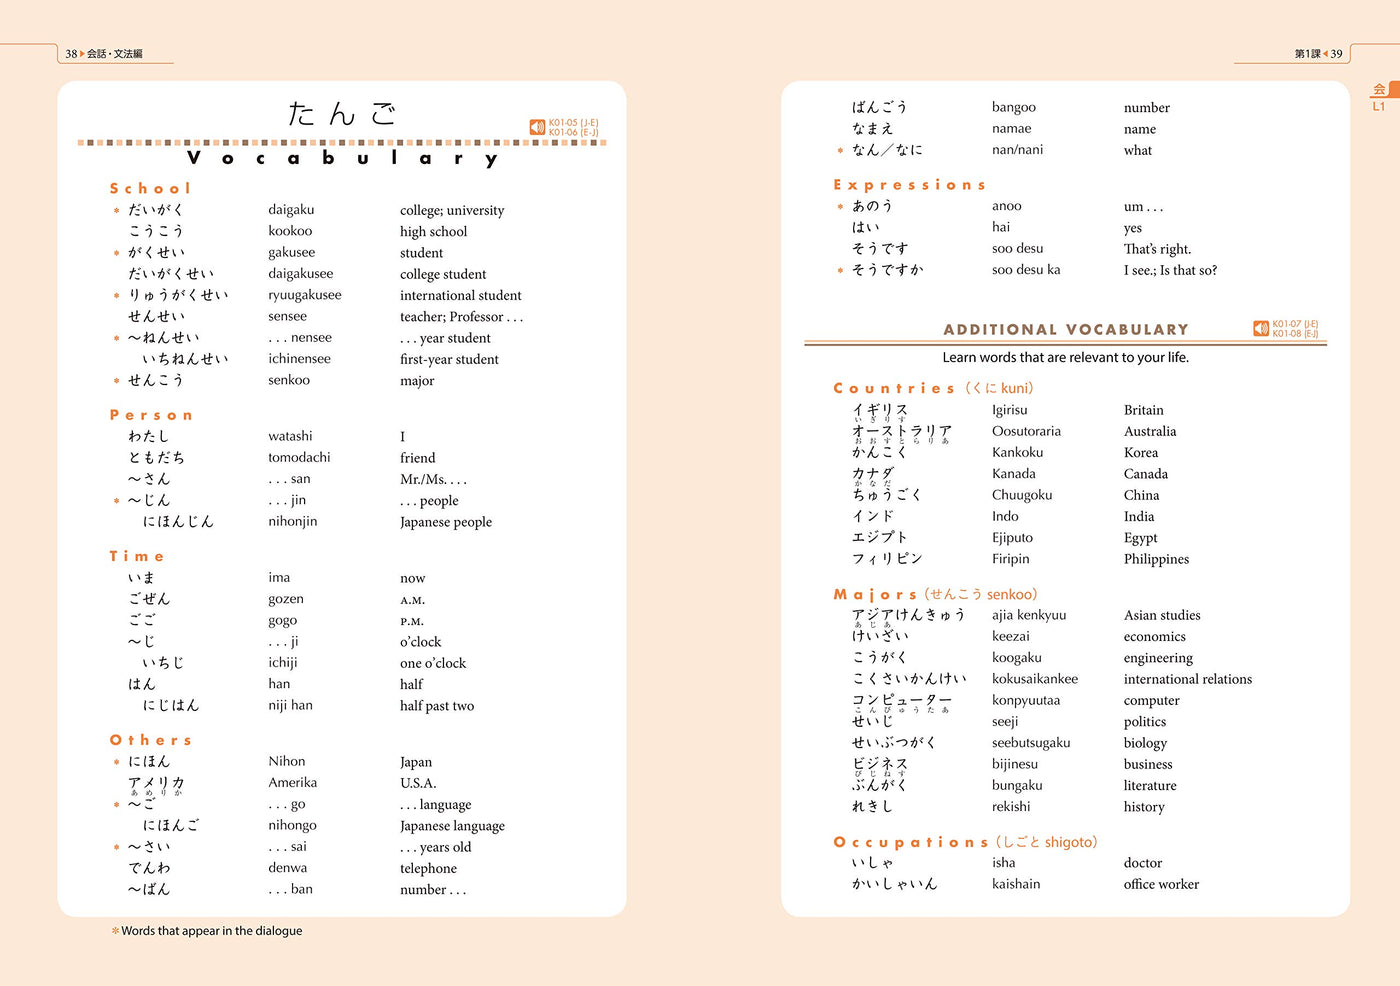 Genki 1-an Integrated Course In Elementary Japanese Learning Book